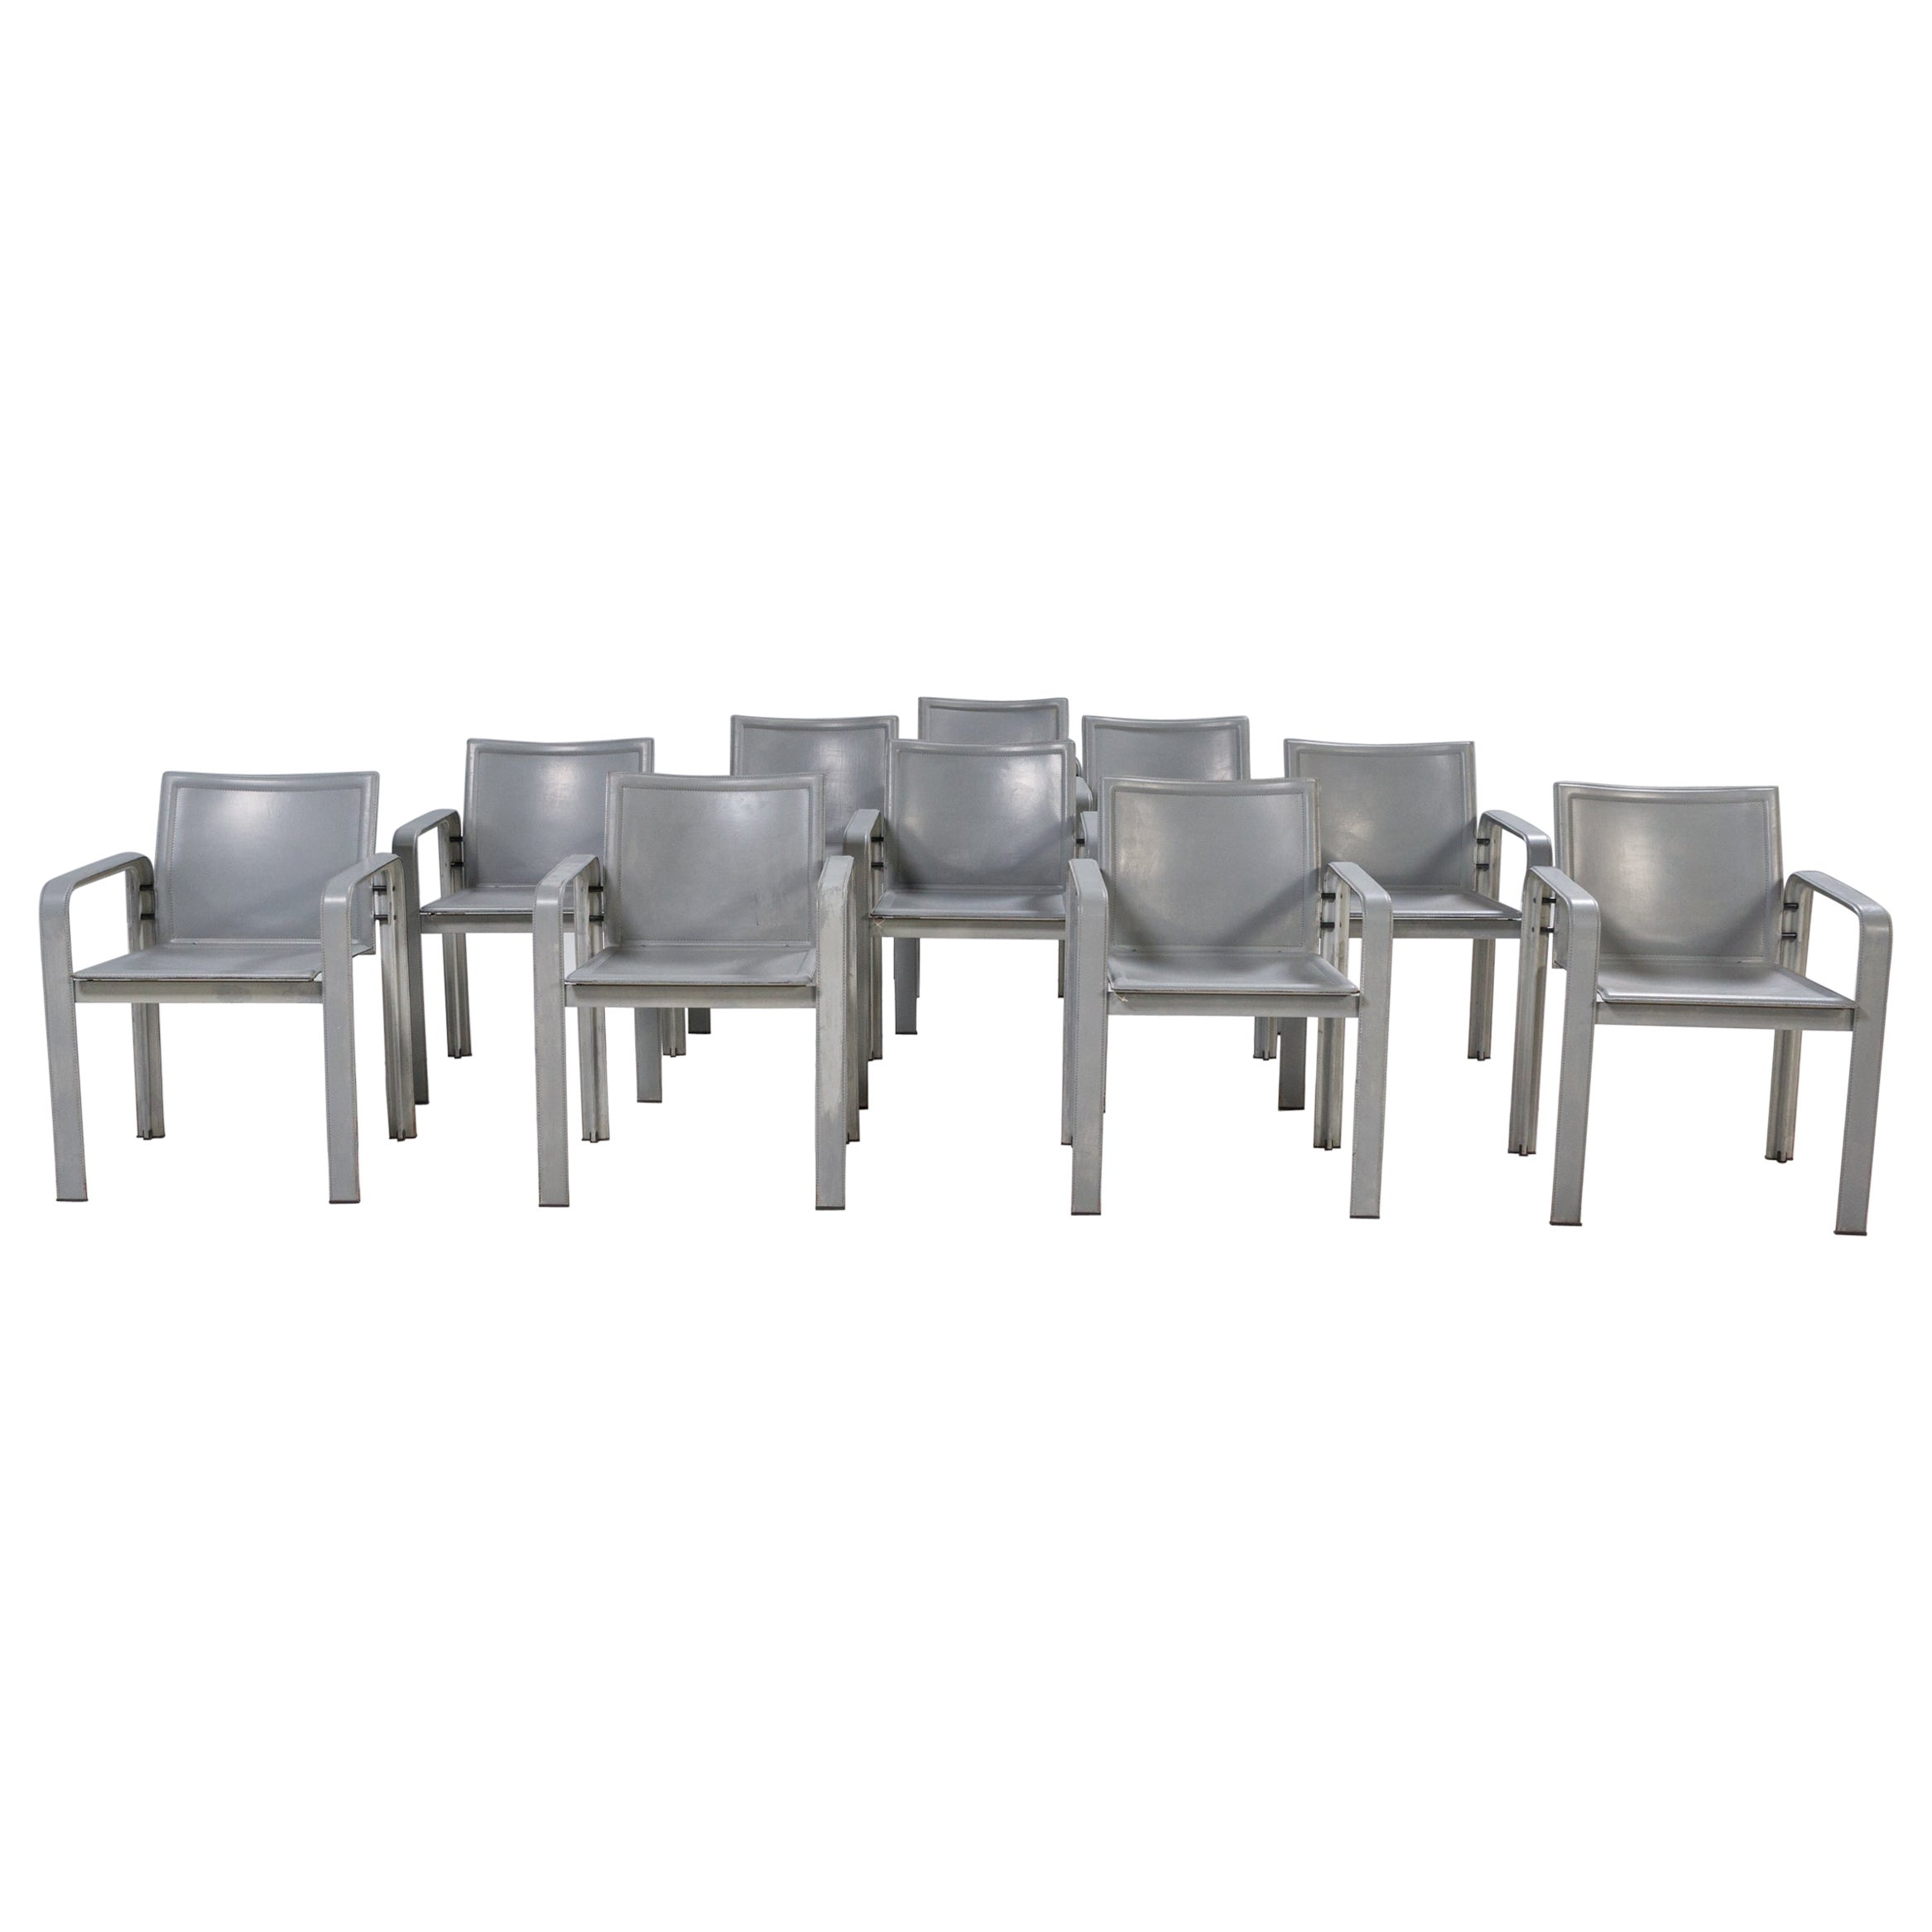 Matteo Grassi Golfo Dei Poeti Grey Leather Dining Chairs, Set of 10 For Sale